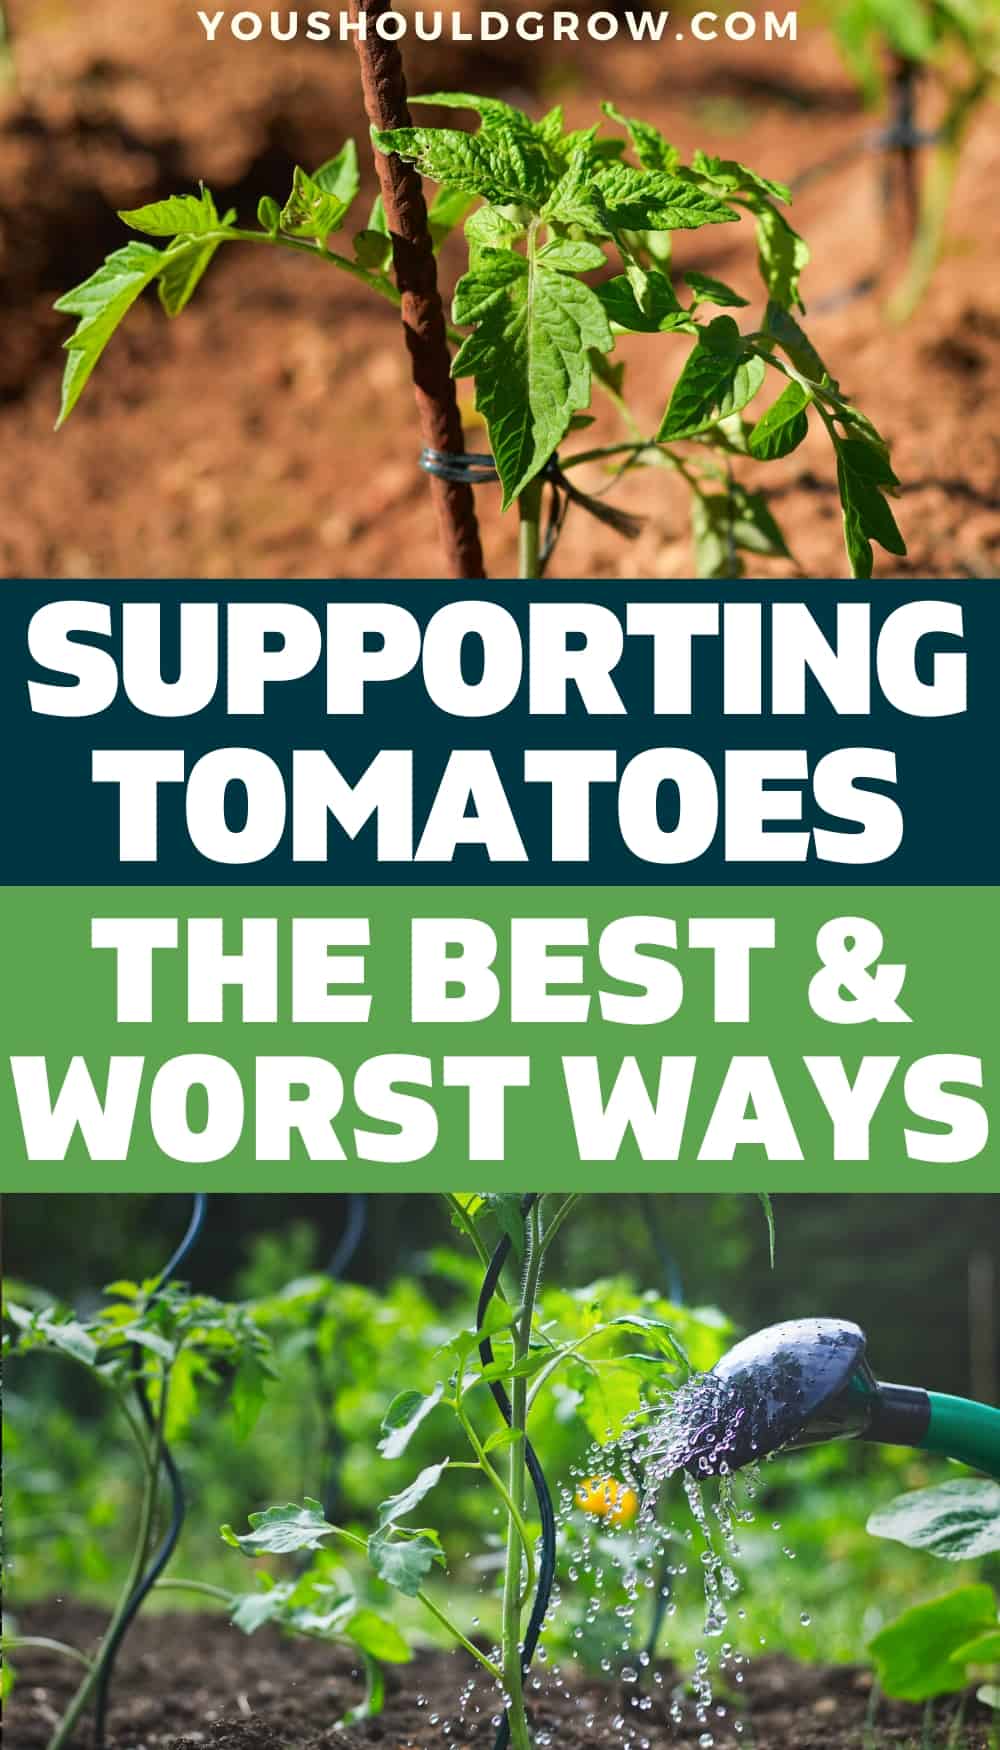 Growing tomatoes in your vegetable garden means you get to enjoy a summer full of your own organic tomatoes. Supporting tomatoes to keep them off the ground is the best way to keep healthy plants and get more tomatoes. Looking for tomato trellis ideas to try this season in your vegetable garden? Here are the best and worst ways to stake your tomato plants.